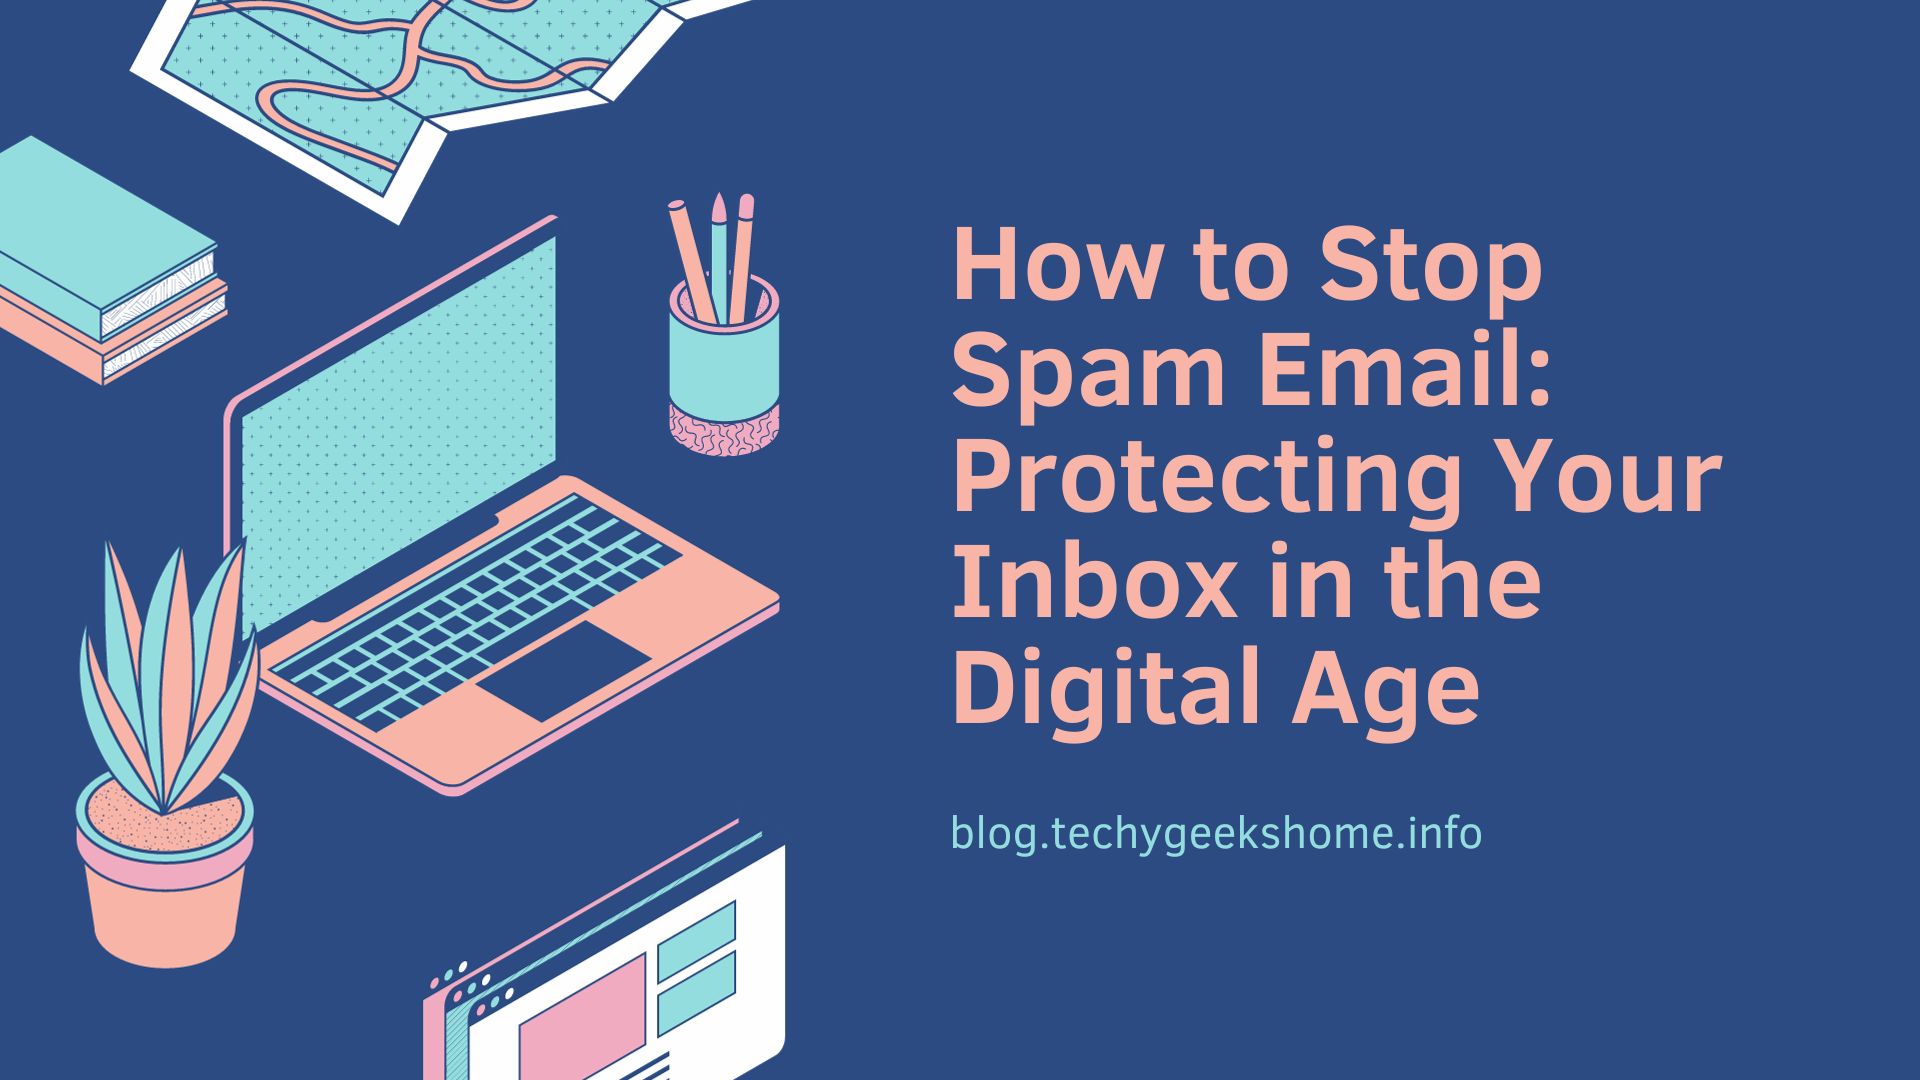 How to Stop Spam Email: Protecting Your Inbox in the Digital Age